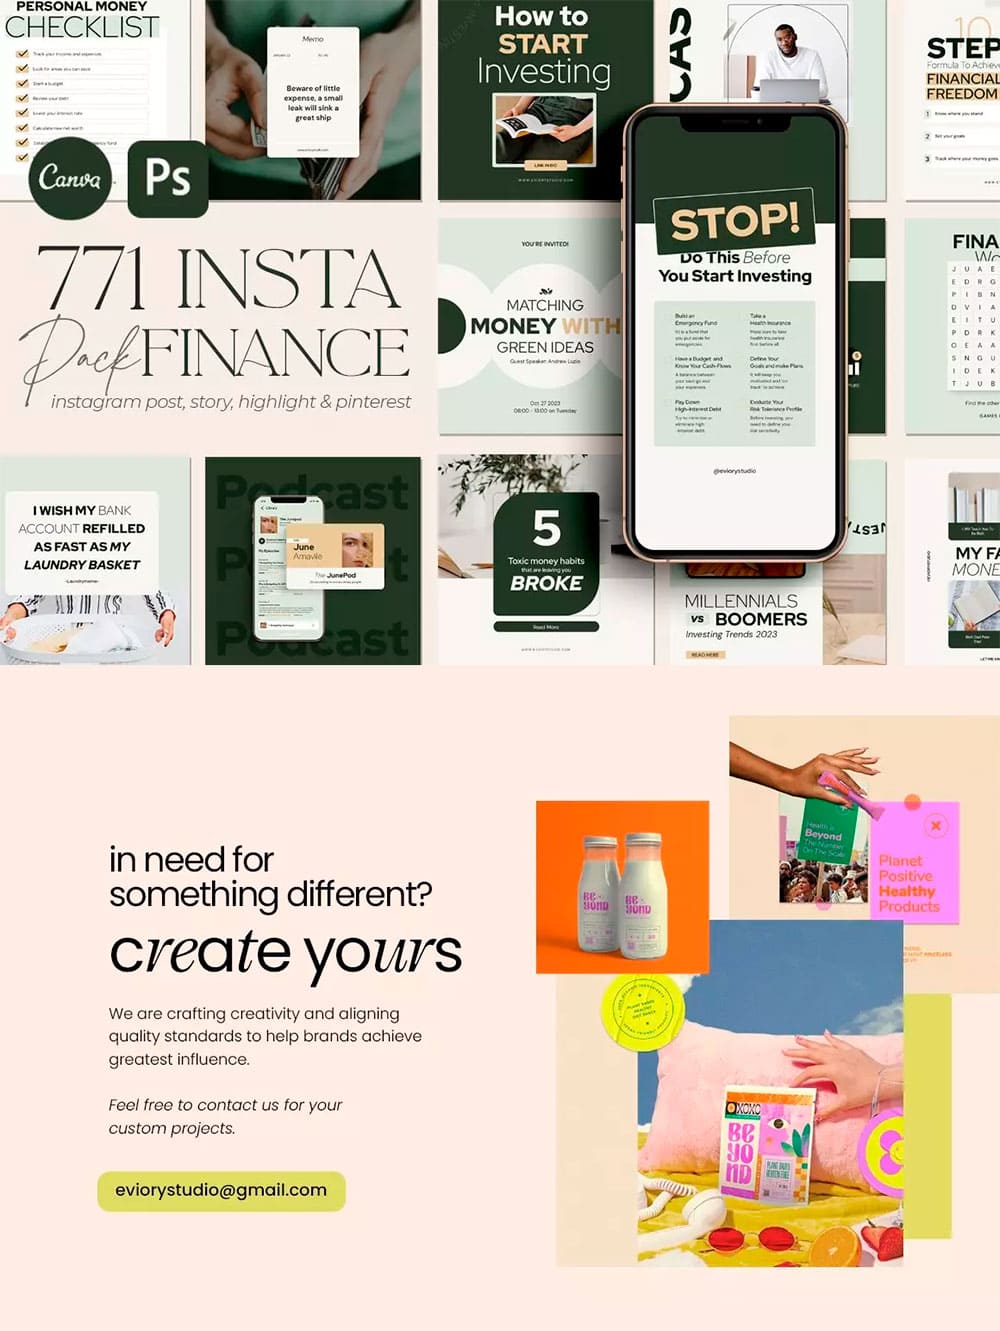 Financial instagram creator canva ps, picture for pinterest 1000x1331.